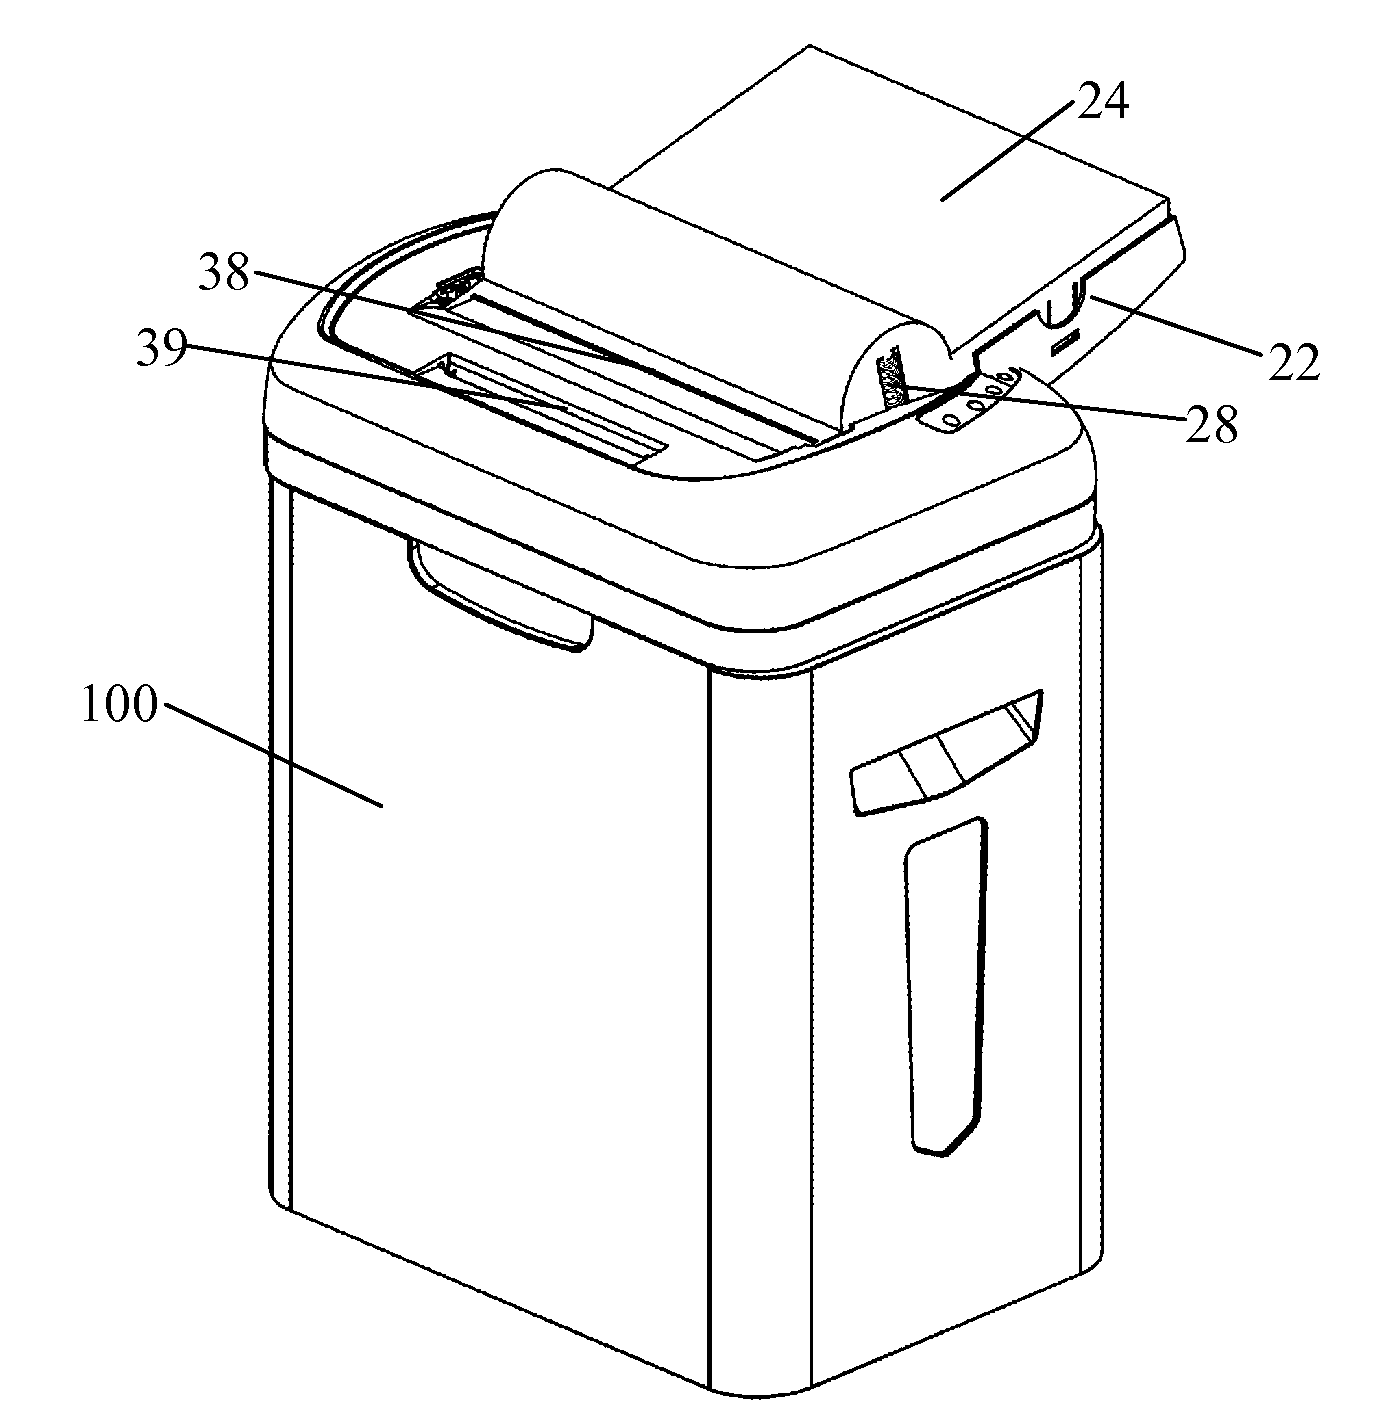 Automatic shredder without choosing the number of paper to be shredded